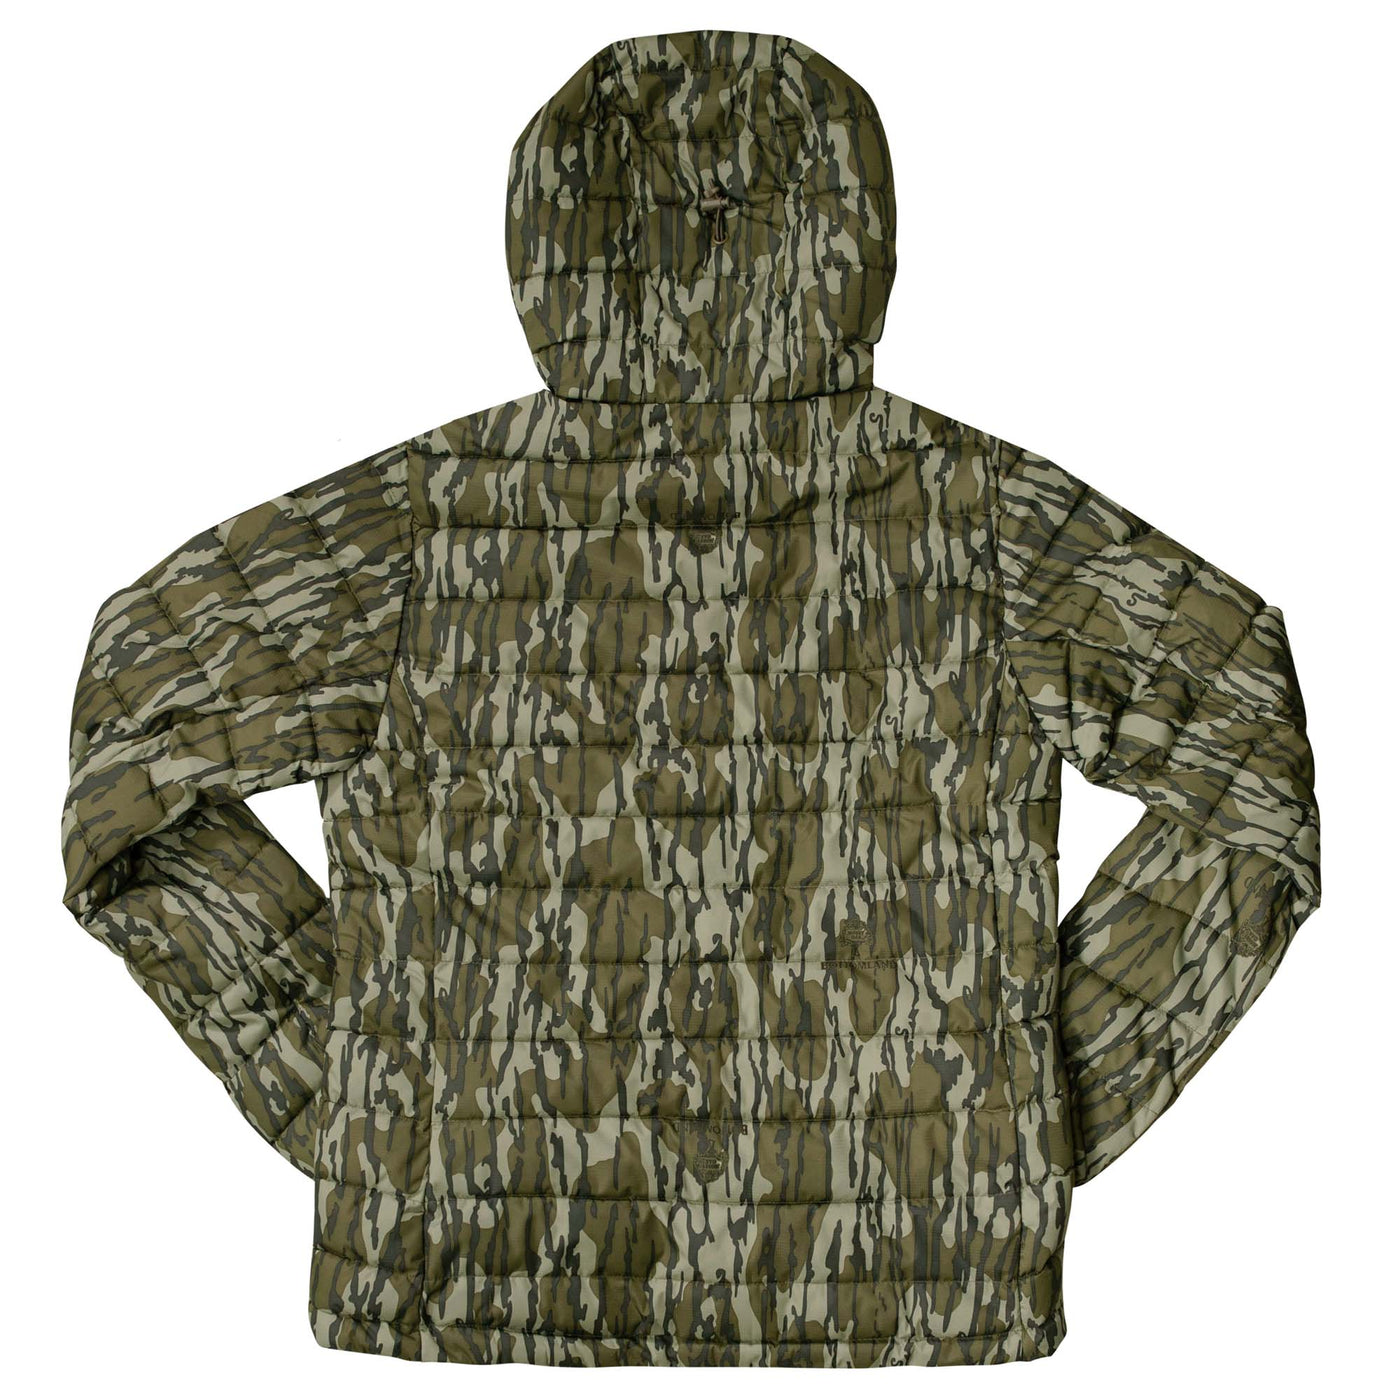 Cotton Mill Insulated Jacket – The Mossy Oak Store